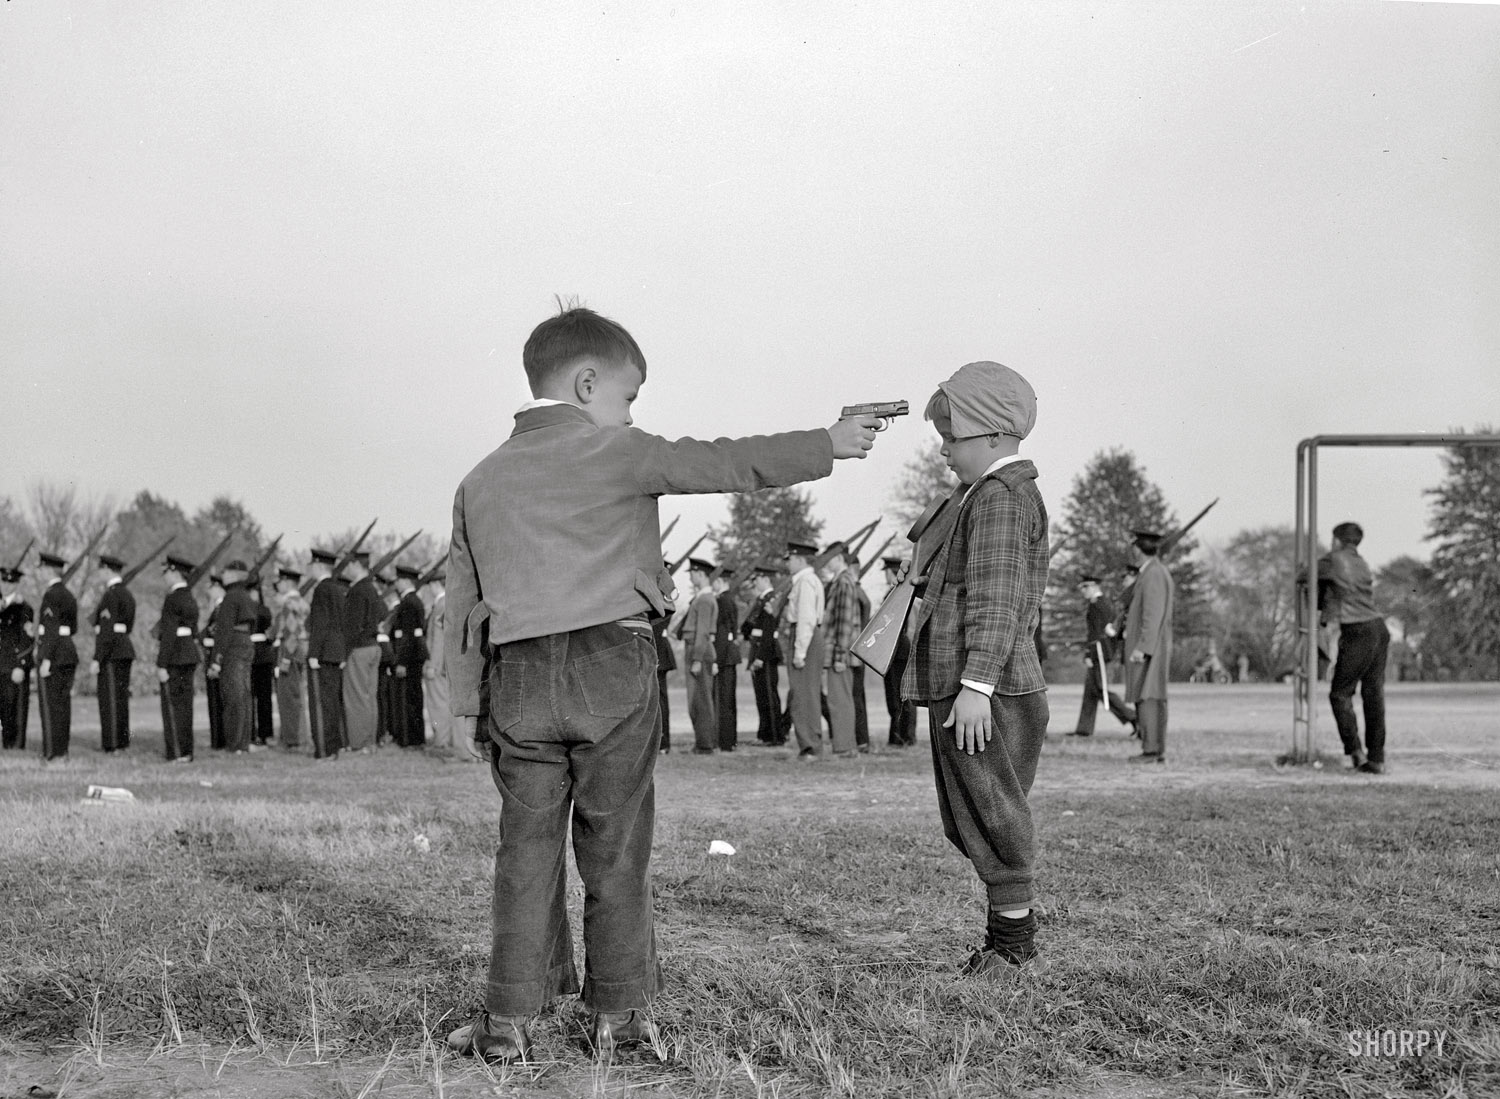 October 1943. Washington, D.C. "Boys watching the Woodrow Wilson high school cadets." Photo by Esther Bubley, Office of War Information. View full size.